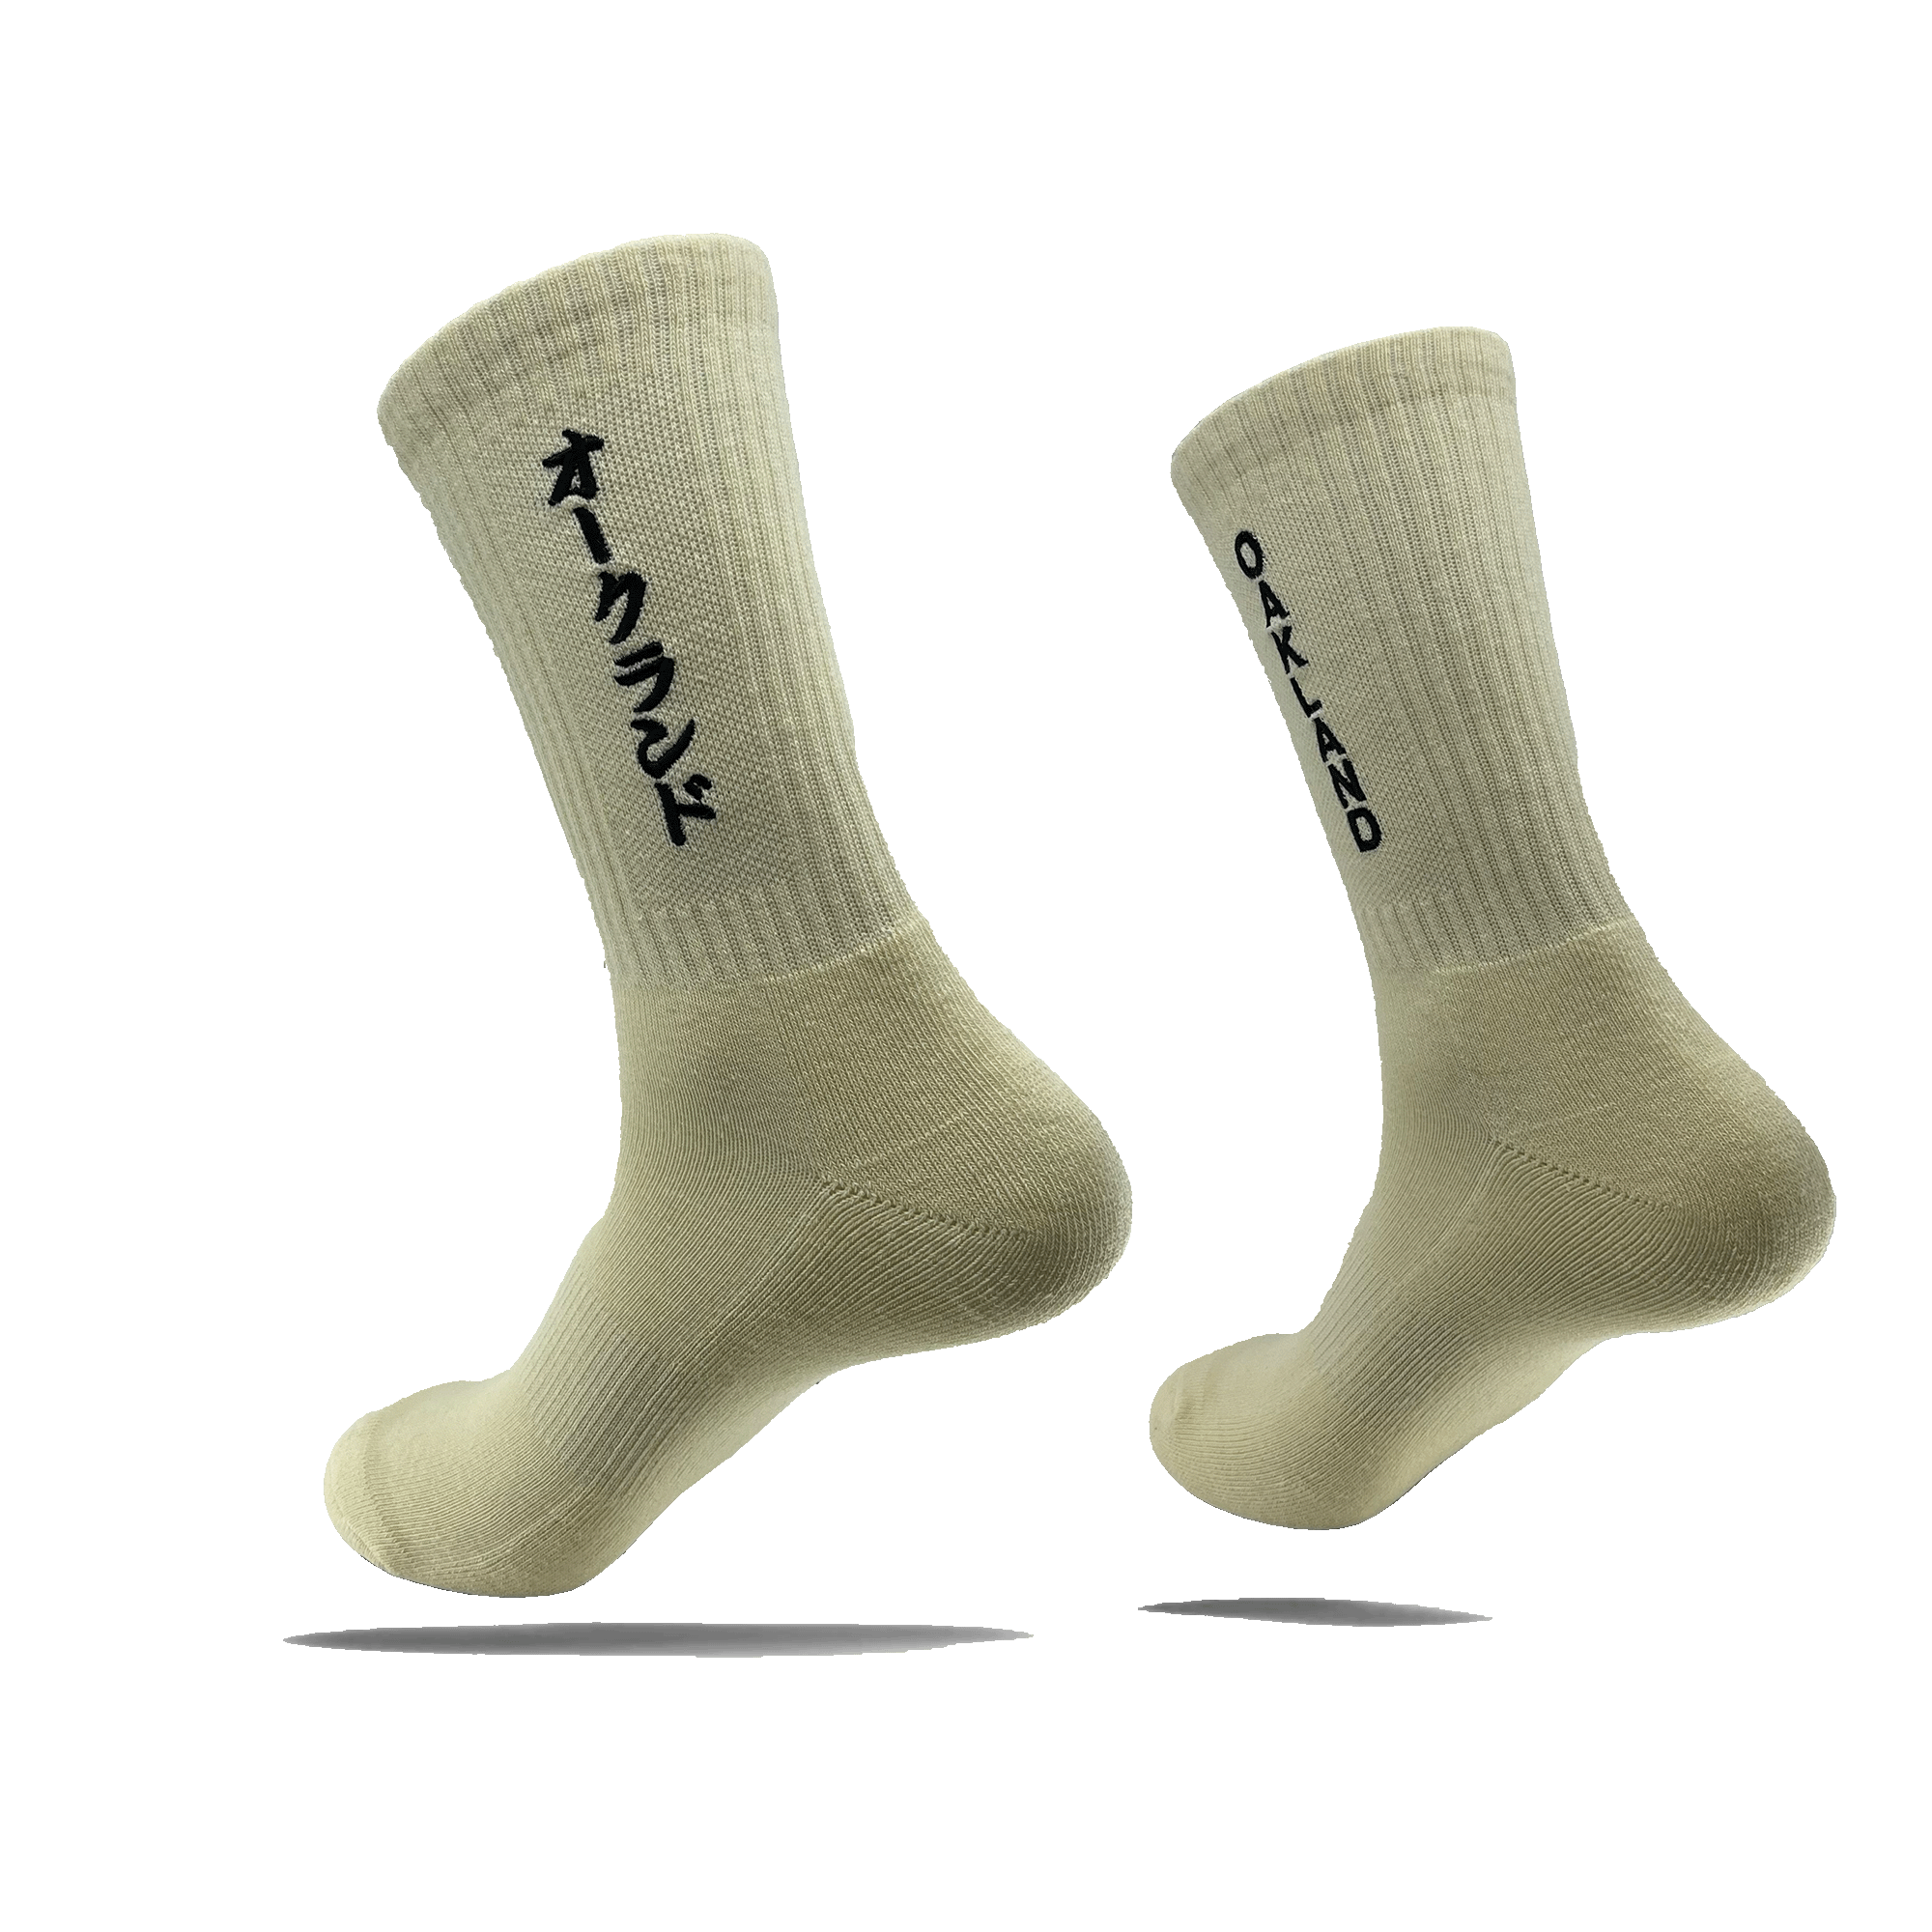 Side view of a pair of white crew socks with a black embroidered OAKLAND wordmark on the side of one sock and Kanji Japanese writing on the other.